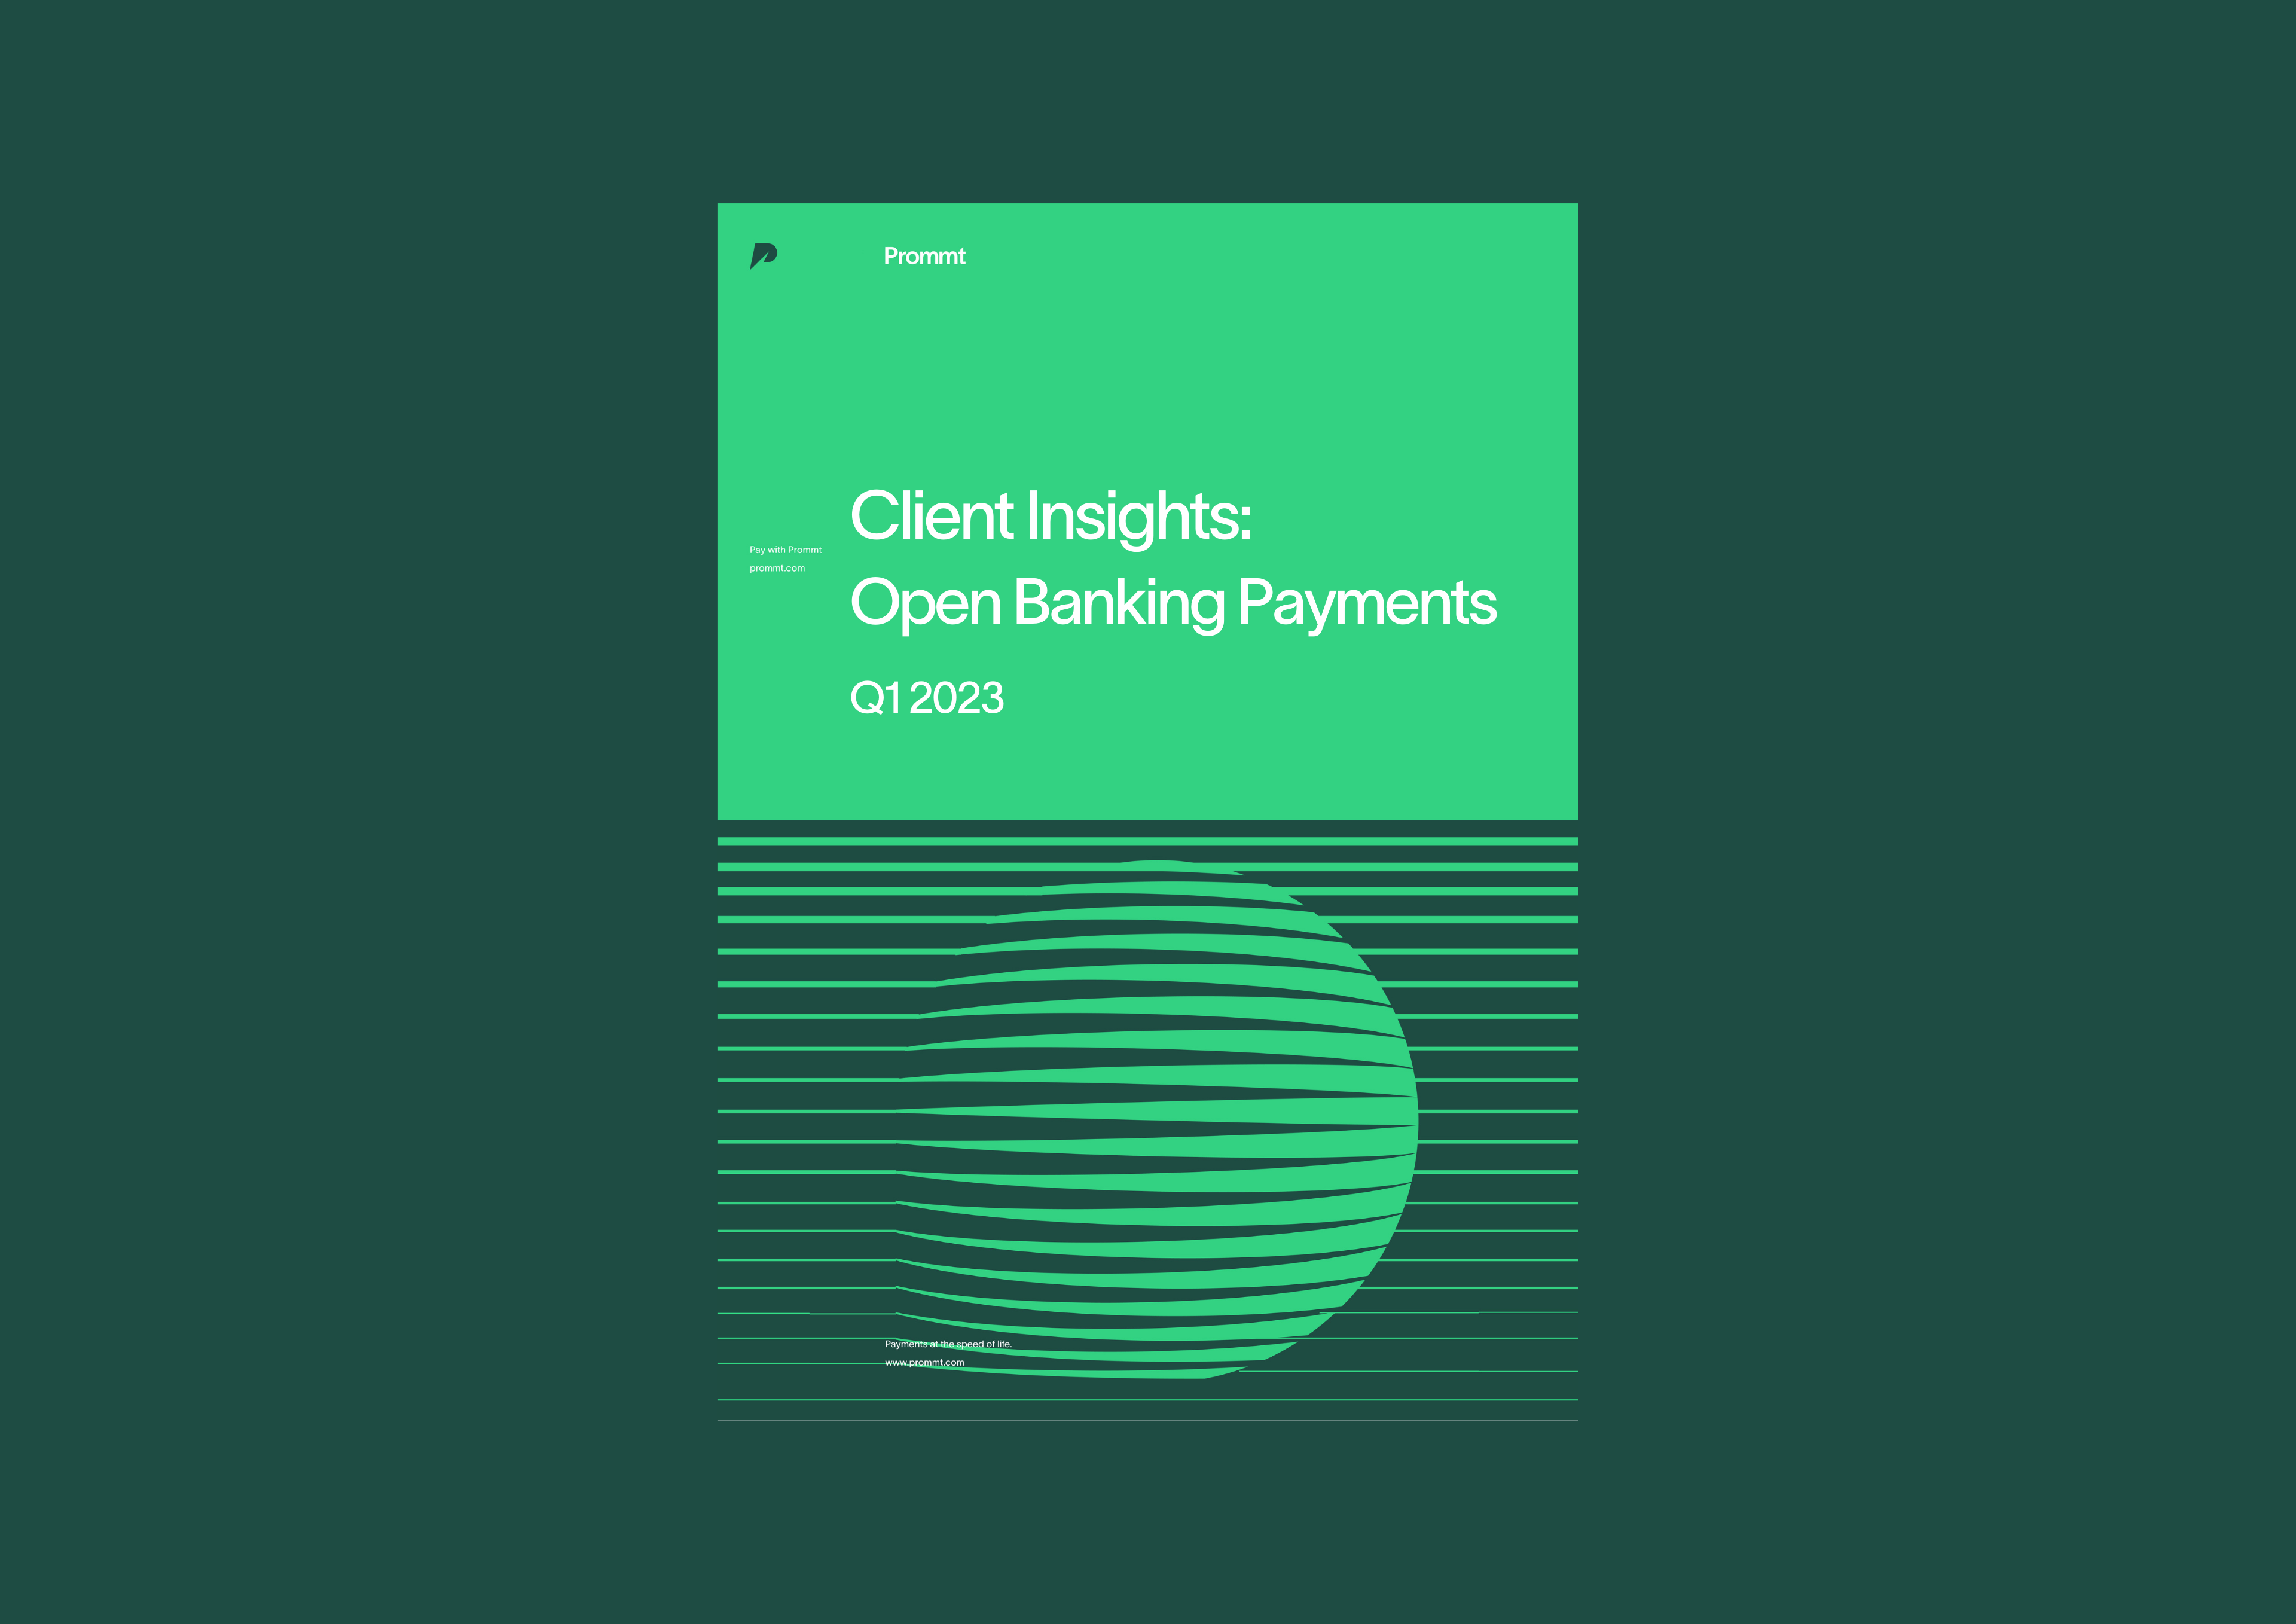 Client Insights - Open Banking Payments, Q1 2023